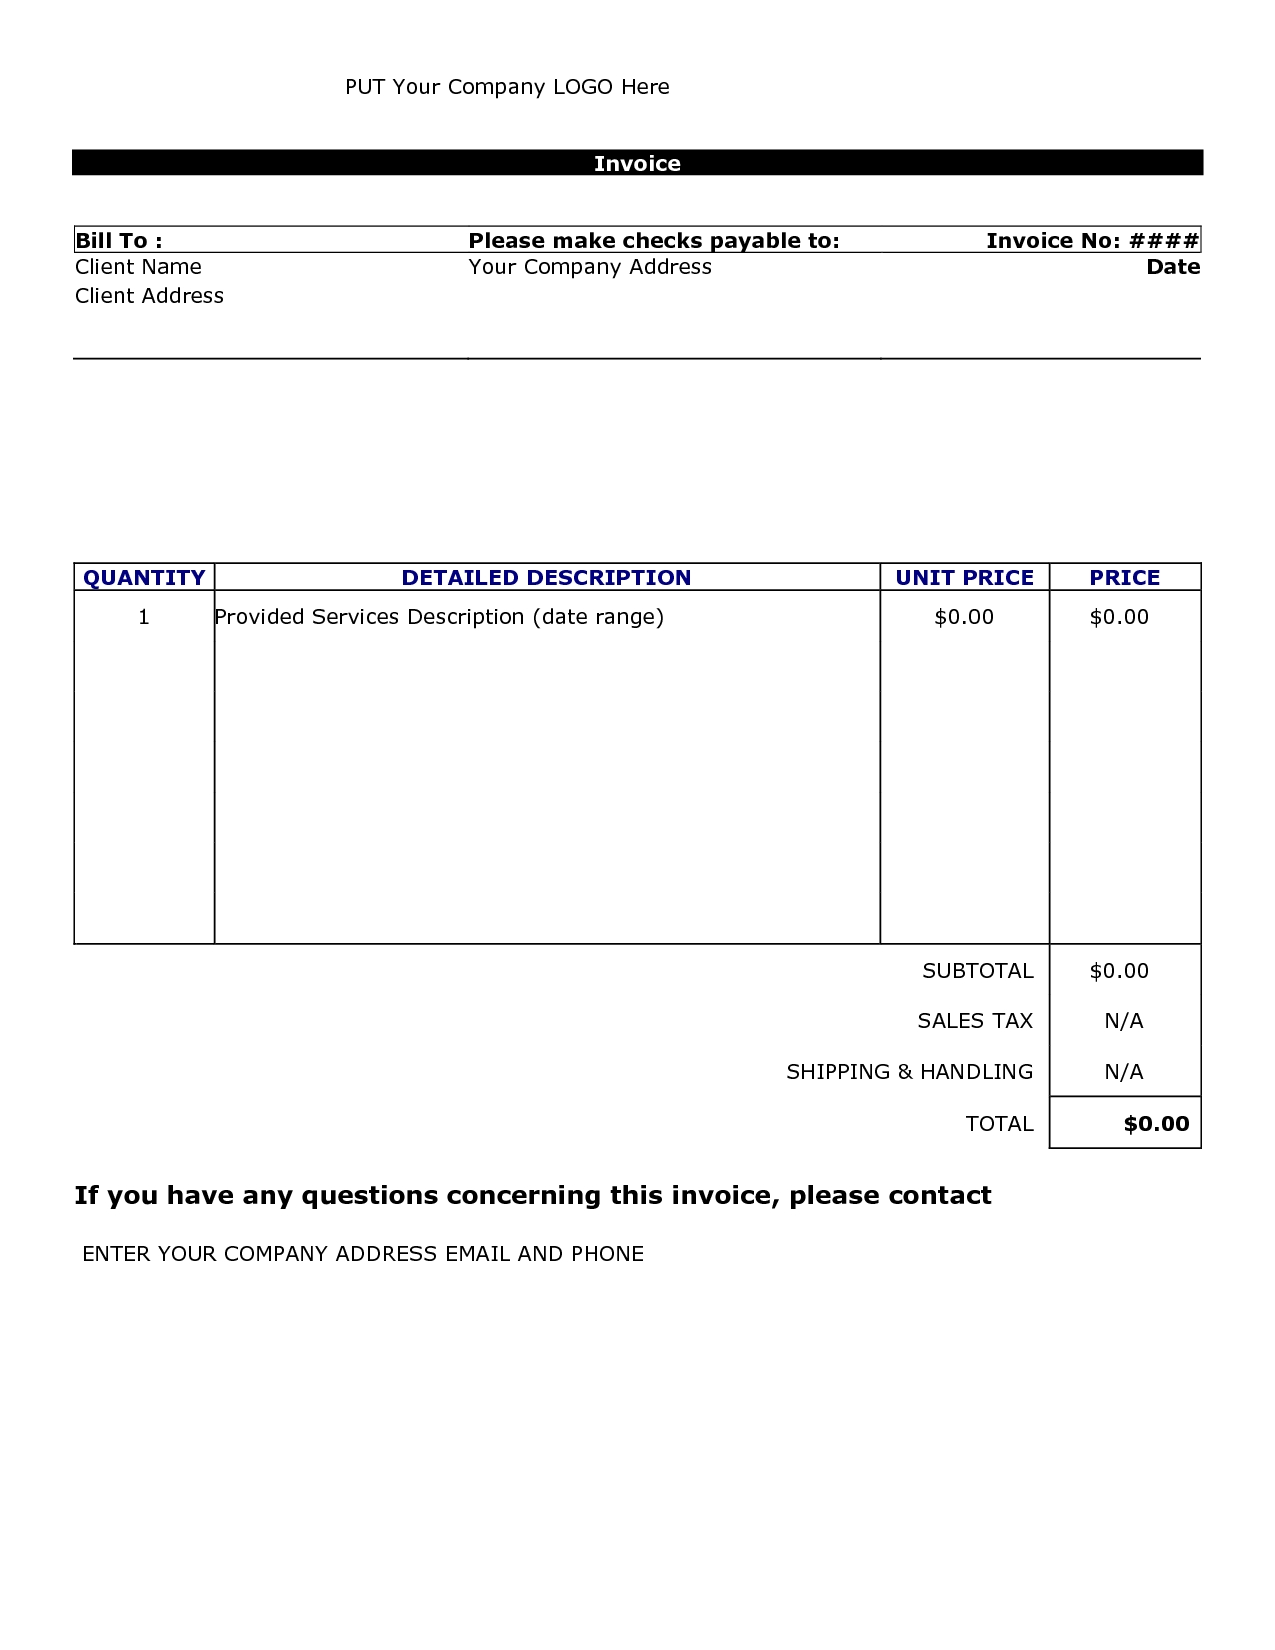 photo word document invoice images invoice formats in word